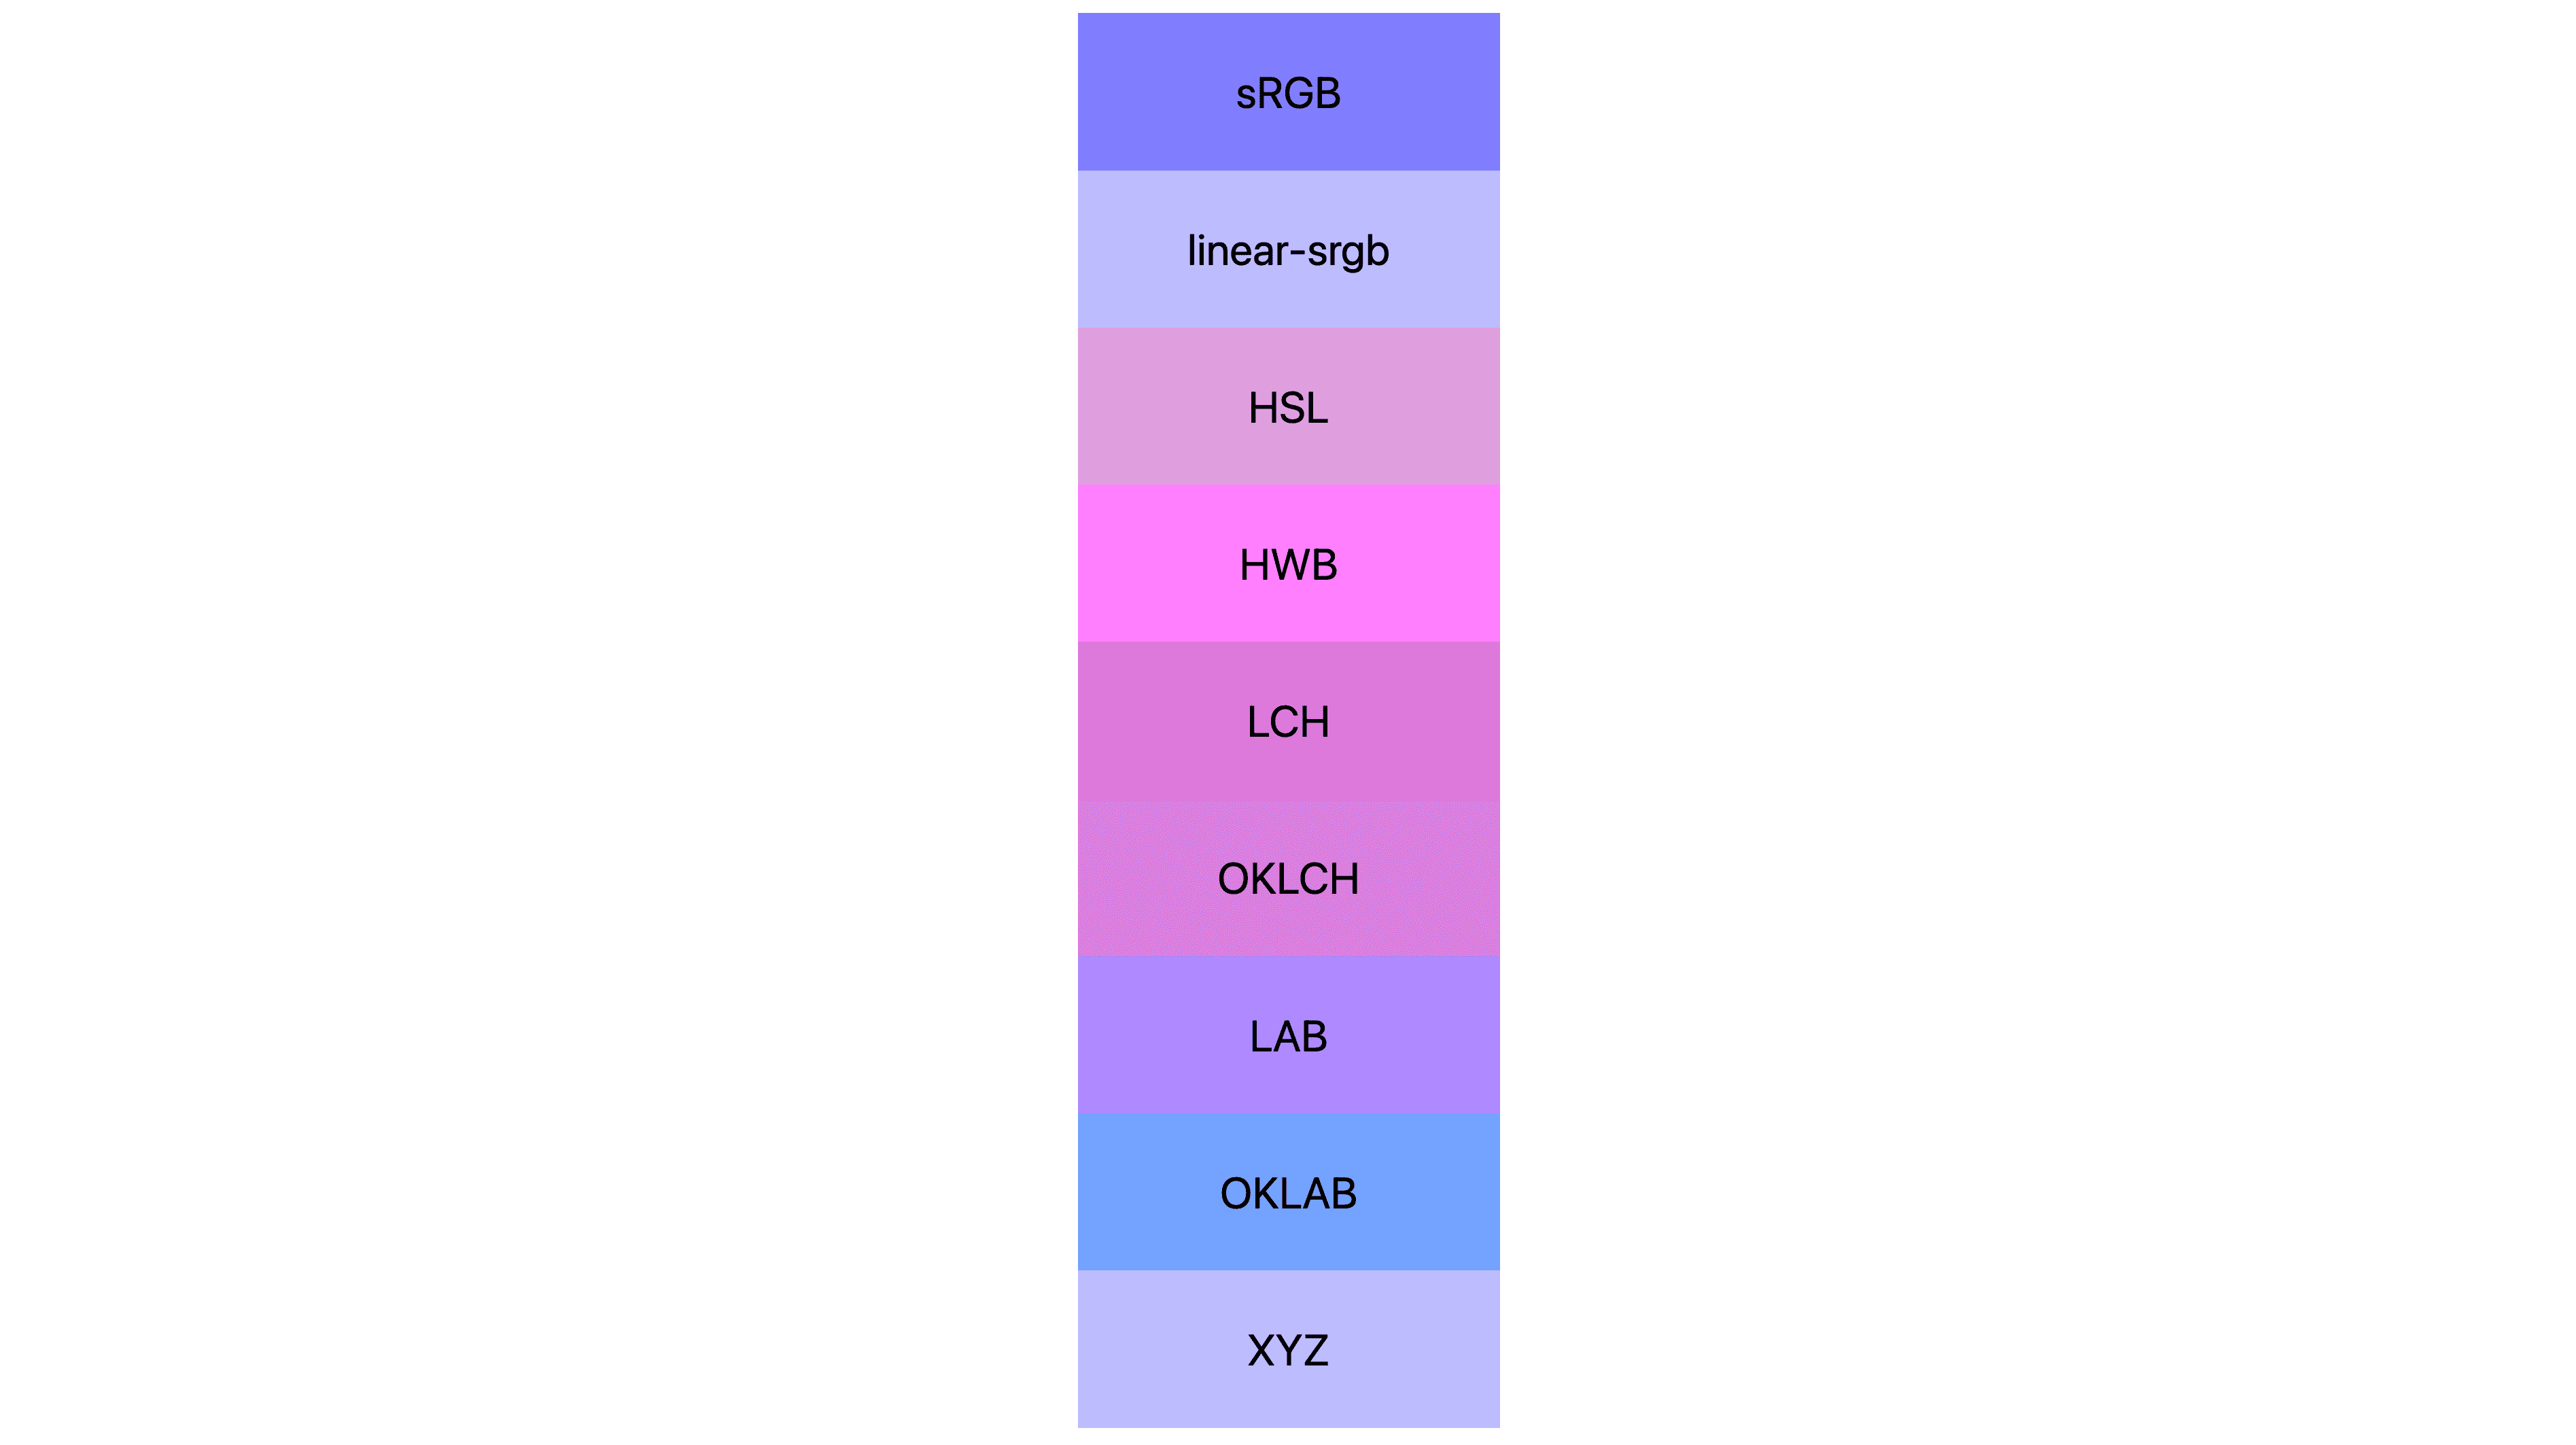 7 color spaces (srgb, linear-srgb, lch, oklch, lab, oklab, xyz) each shown having different results. Many are pink or purple, few are actually still blue.